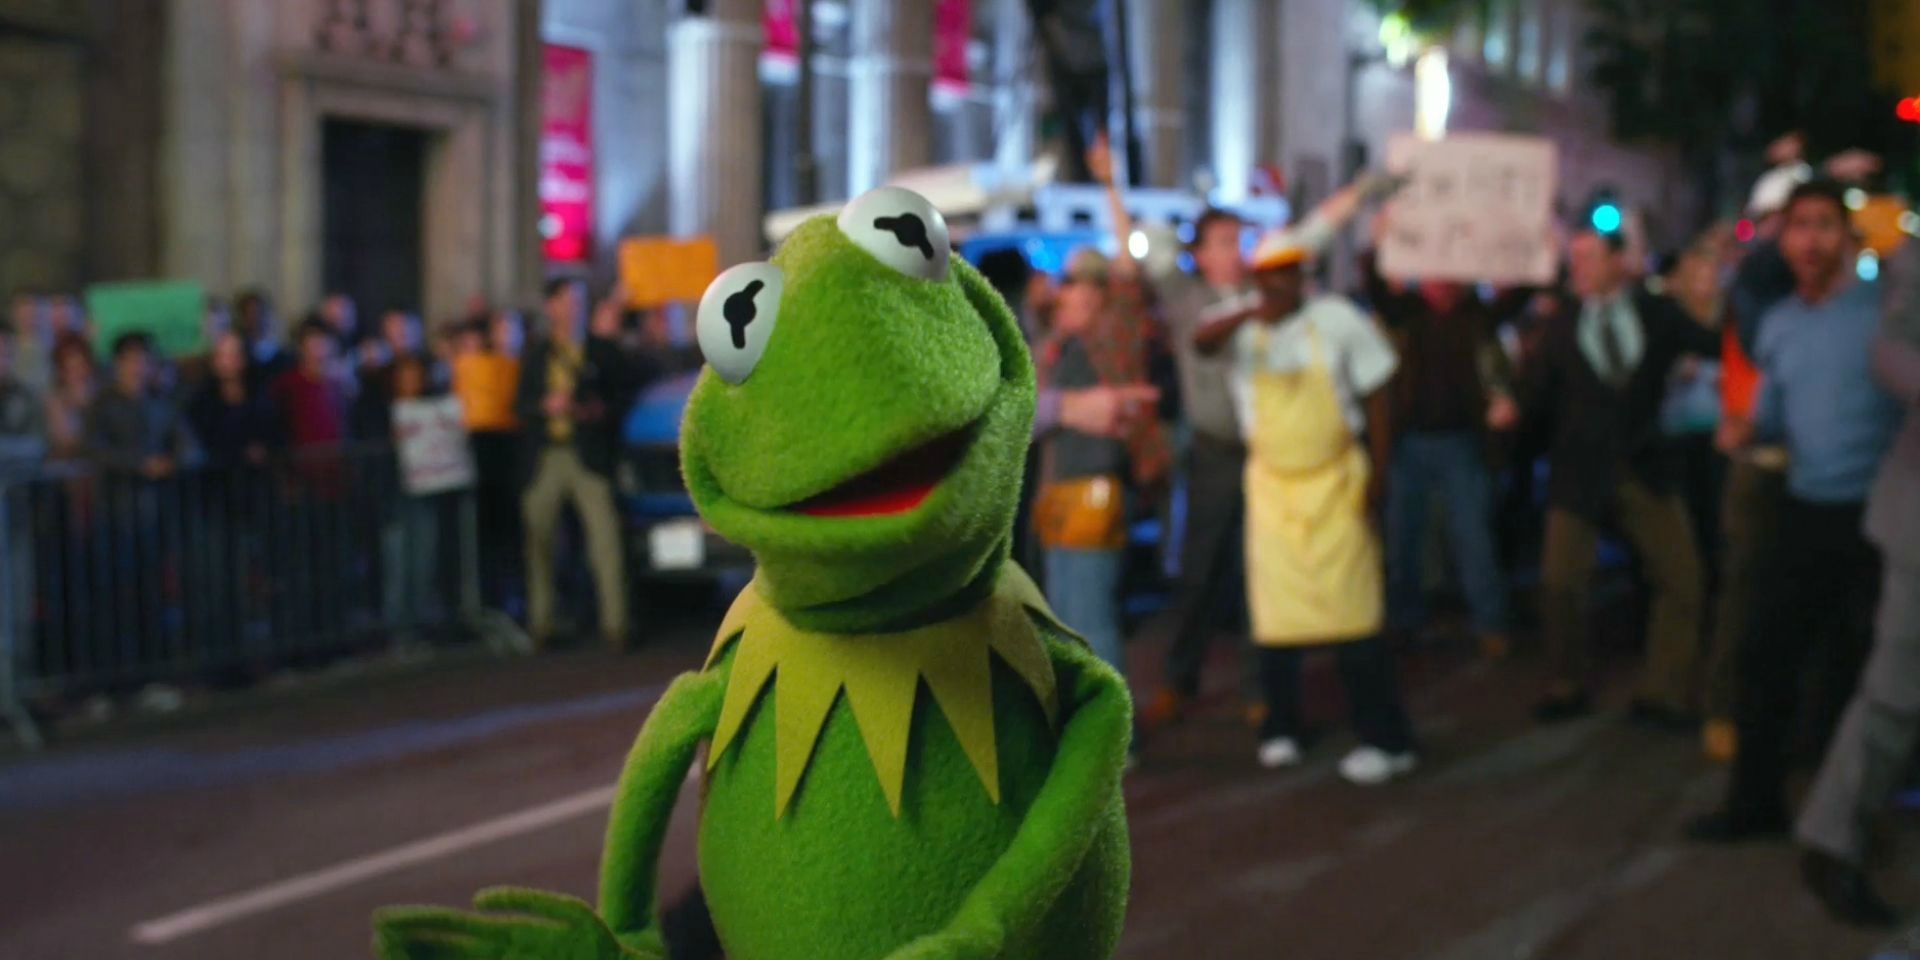 Kermit the Frog in front of crowd in 2011's The Muppets